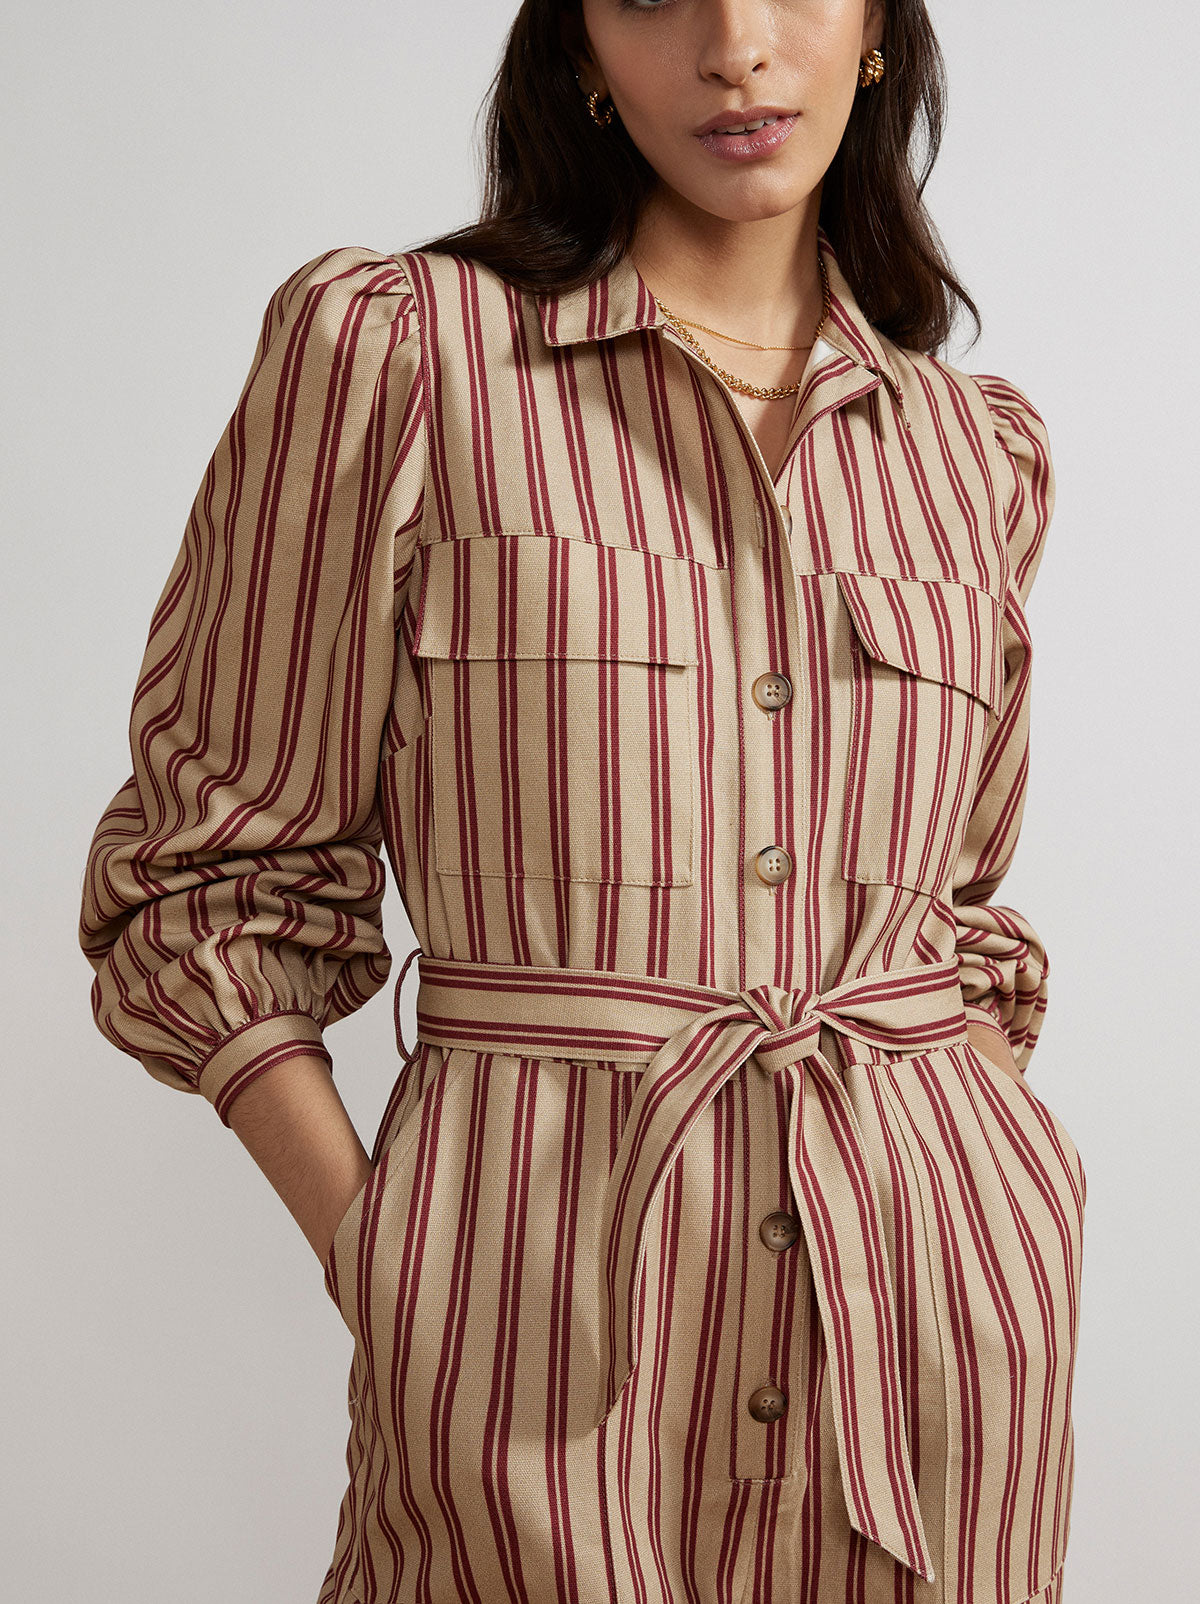 Angie Striped Canvas Jumpsuit By KITRI Studio